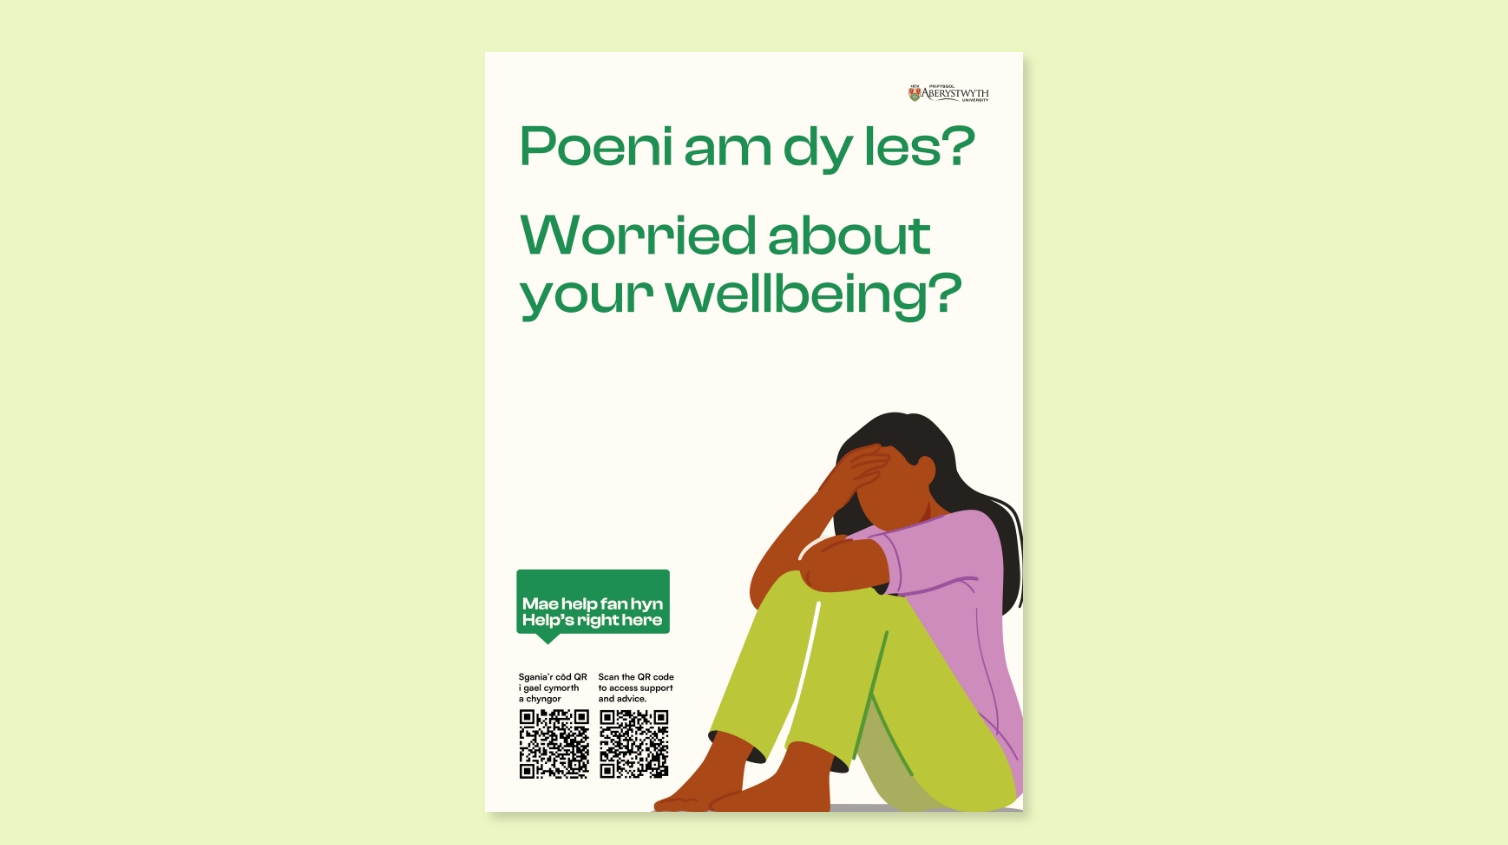 Poster highlighting well-being concerns, featuring a graphic design of a person with head in hands sitting down, a QR code, and health support info on a green background.